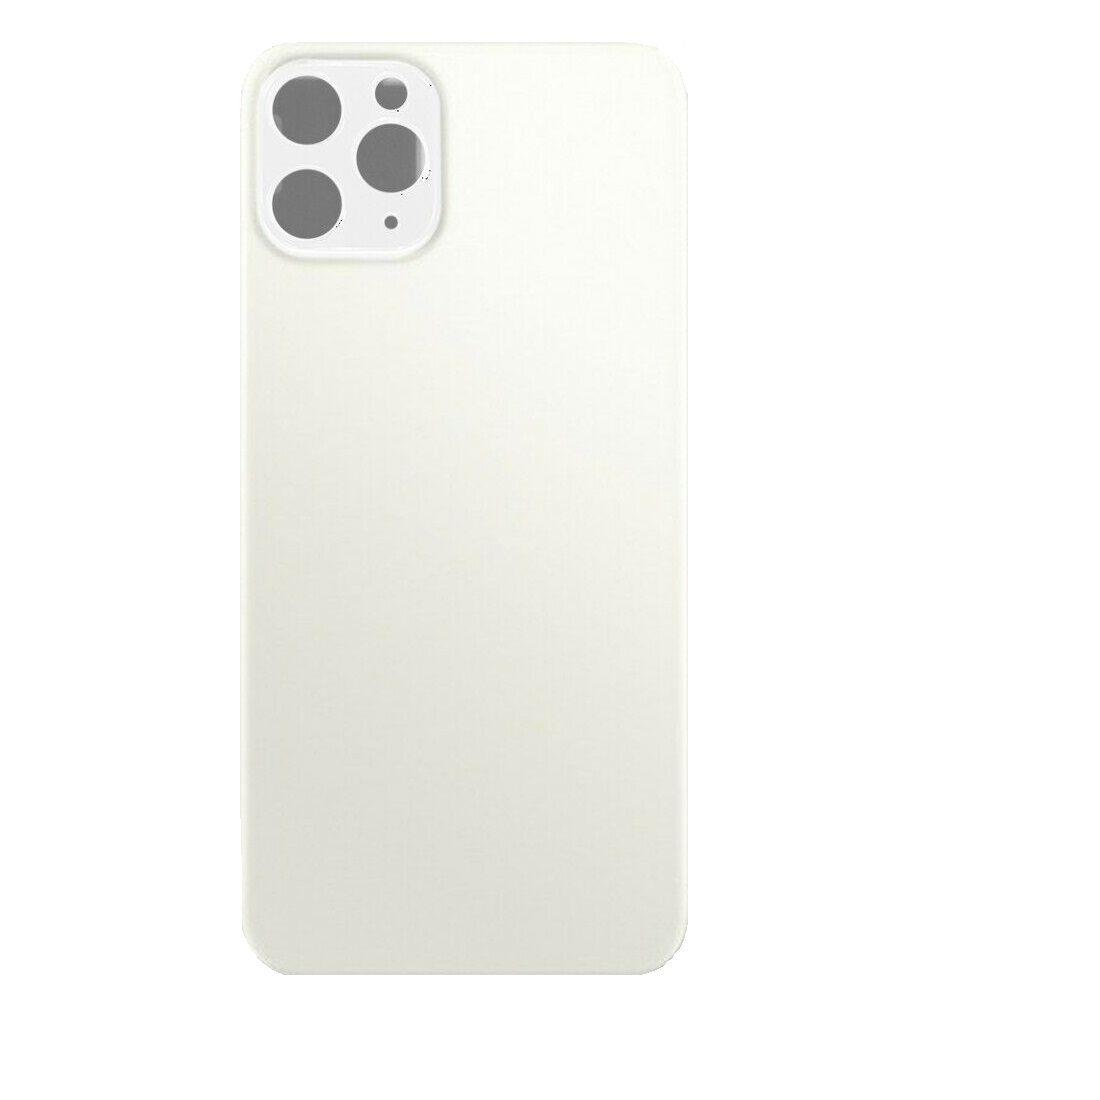 Iphone 11 pro max white flip without camera glass